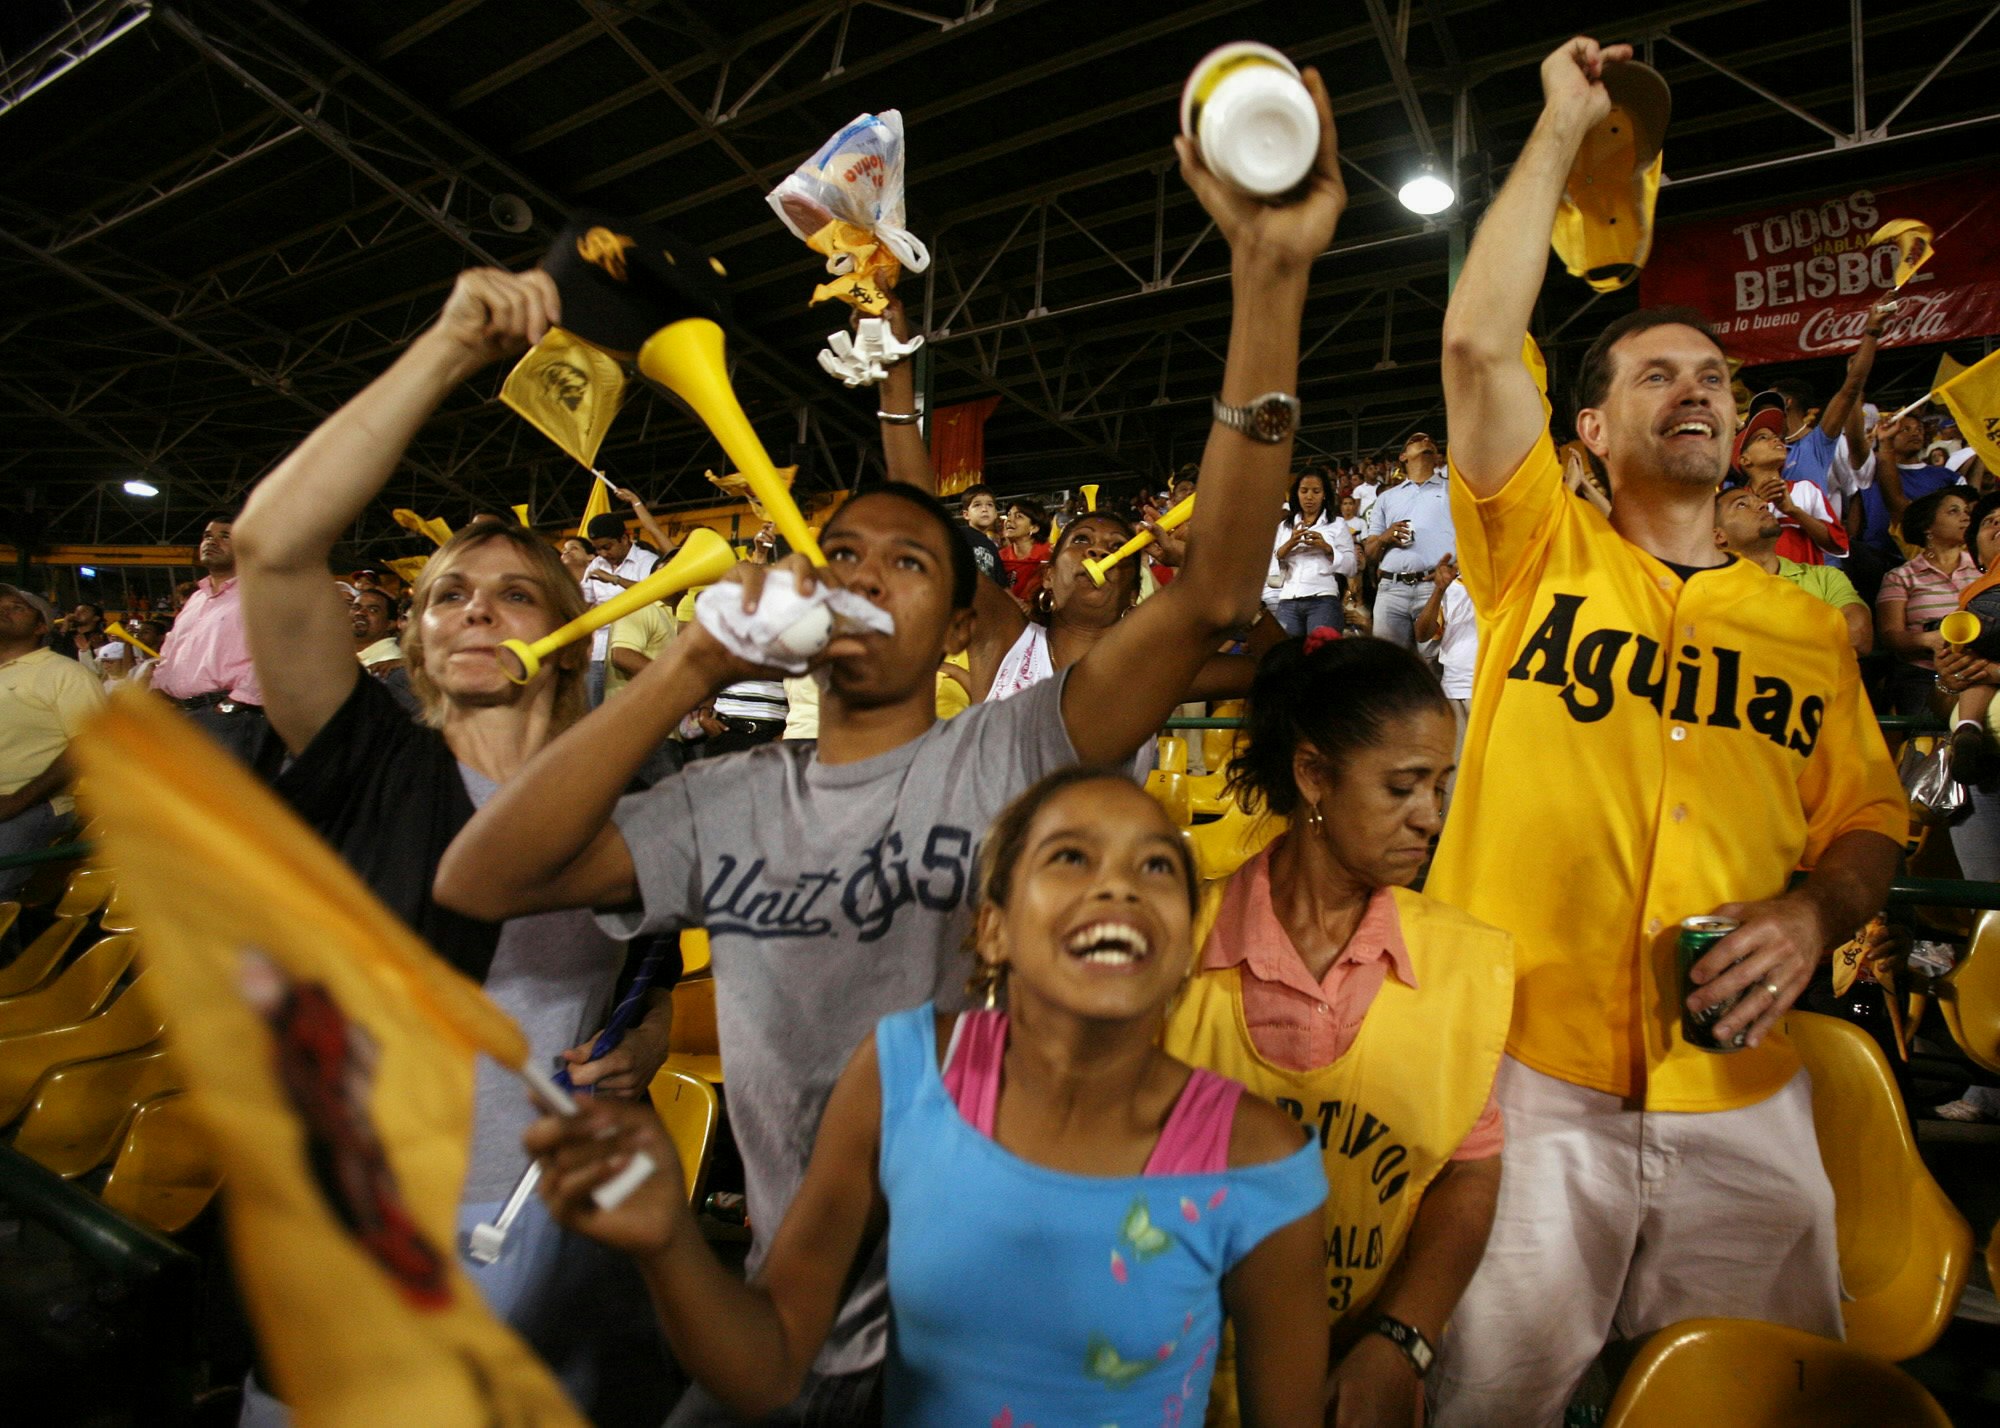 A group of people cheer (some with plastic horns) for the Aguilas baseball team in the Dominican Republic  